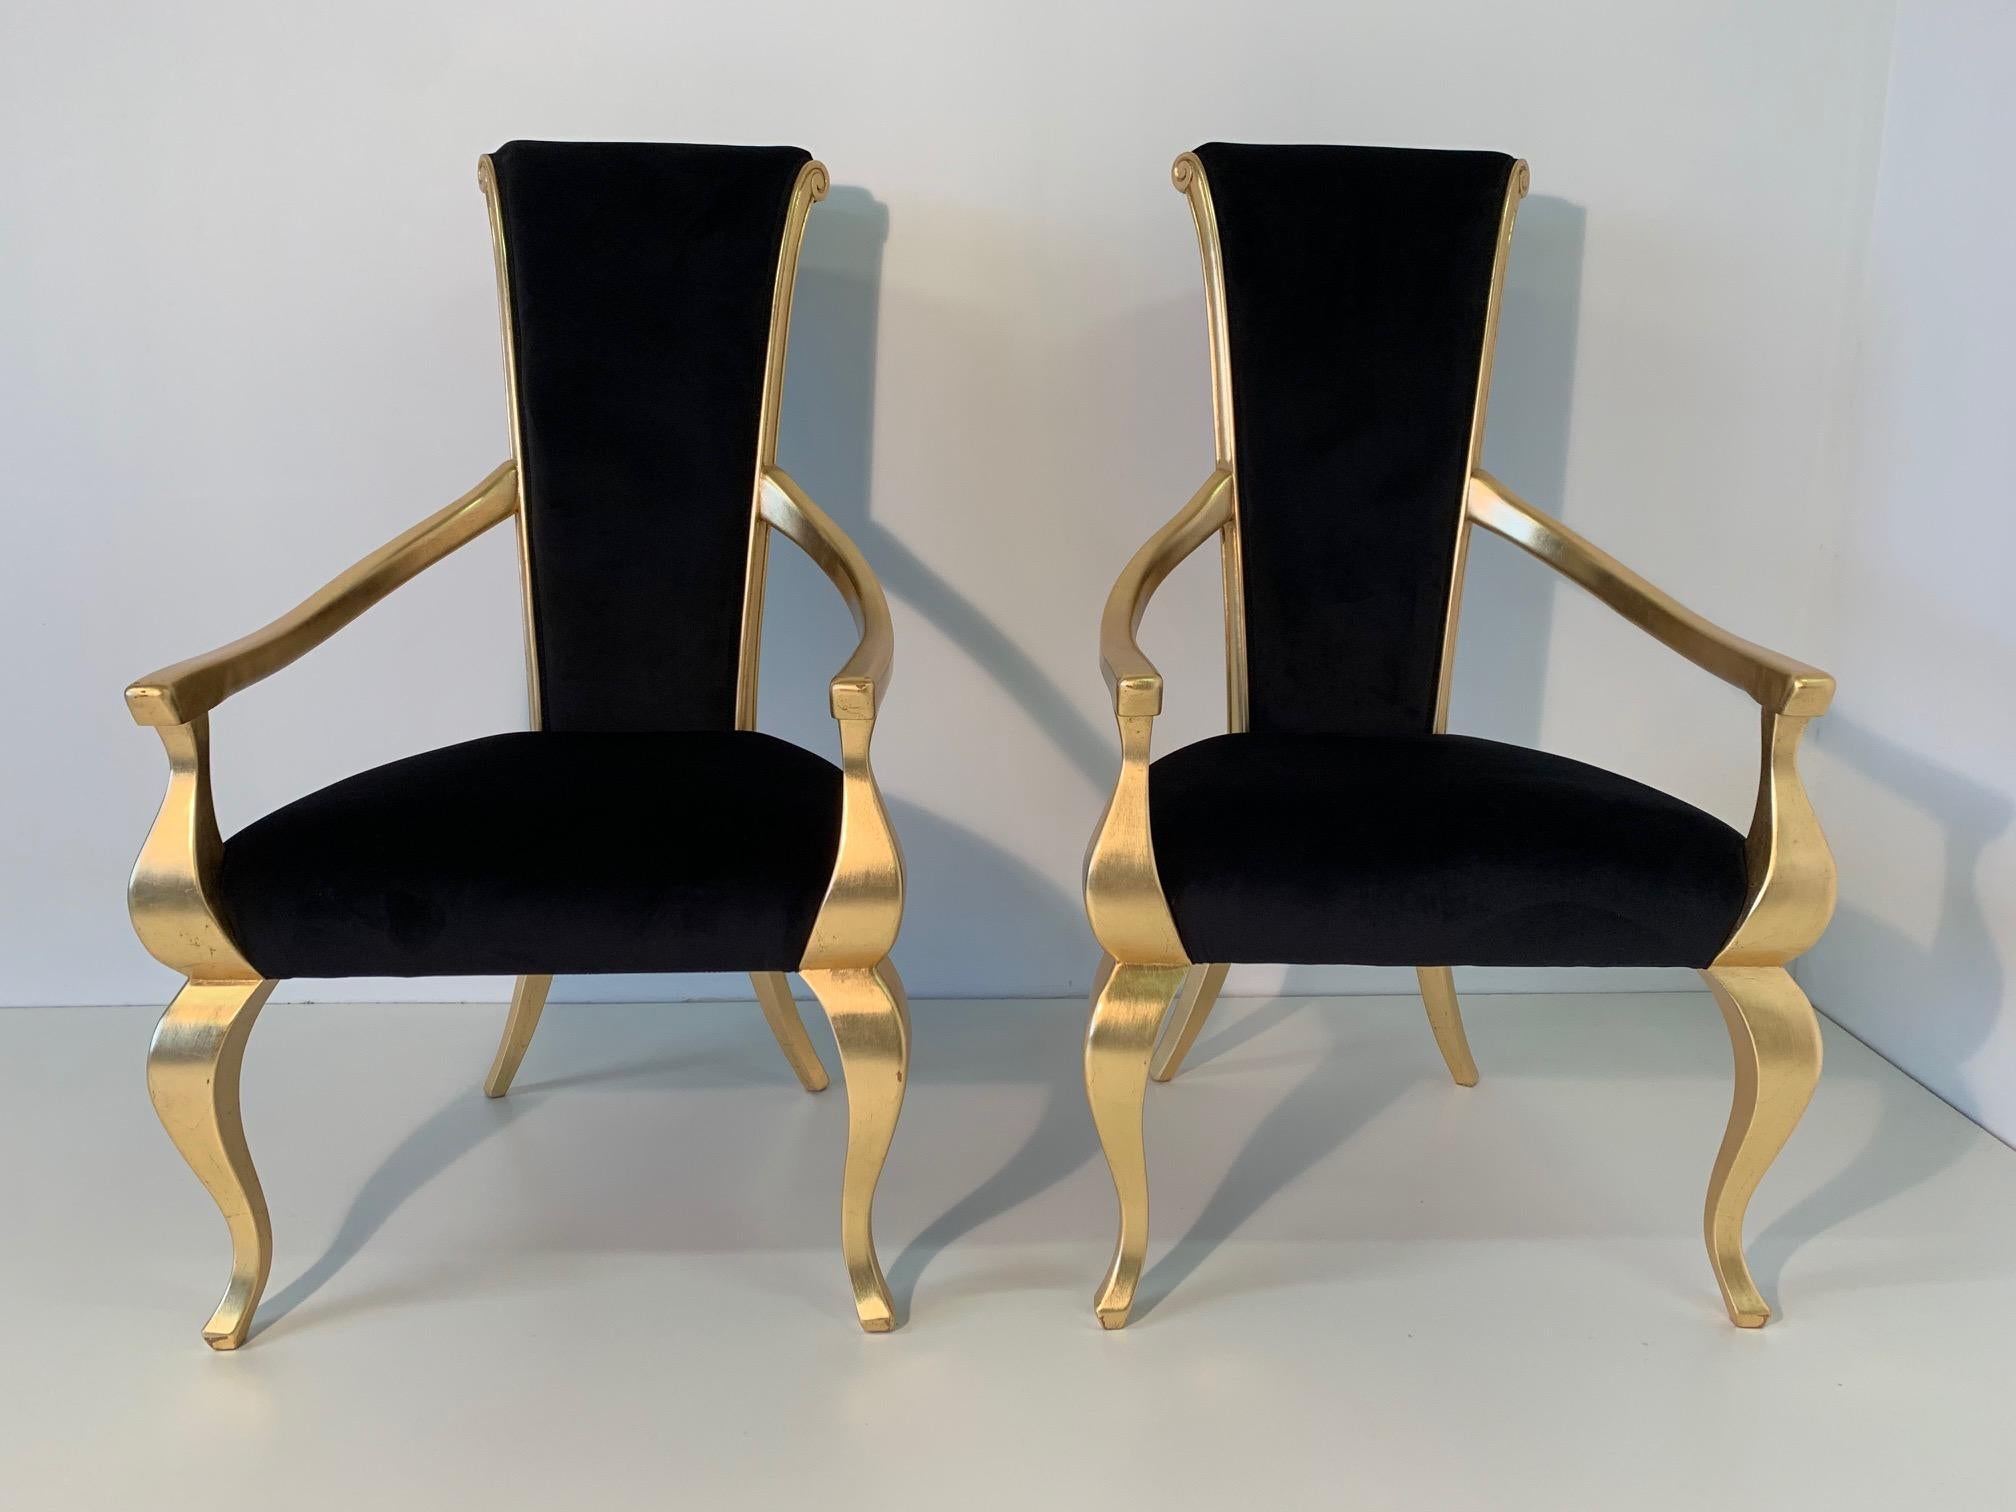 Elegant and important chairs with armrests made in Italy in the 1980s.
The structure is in gold leaf while the upholstery is in fine black velvet.
Both chairs have recently been completely restored.